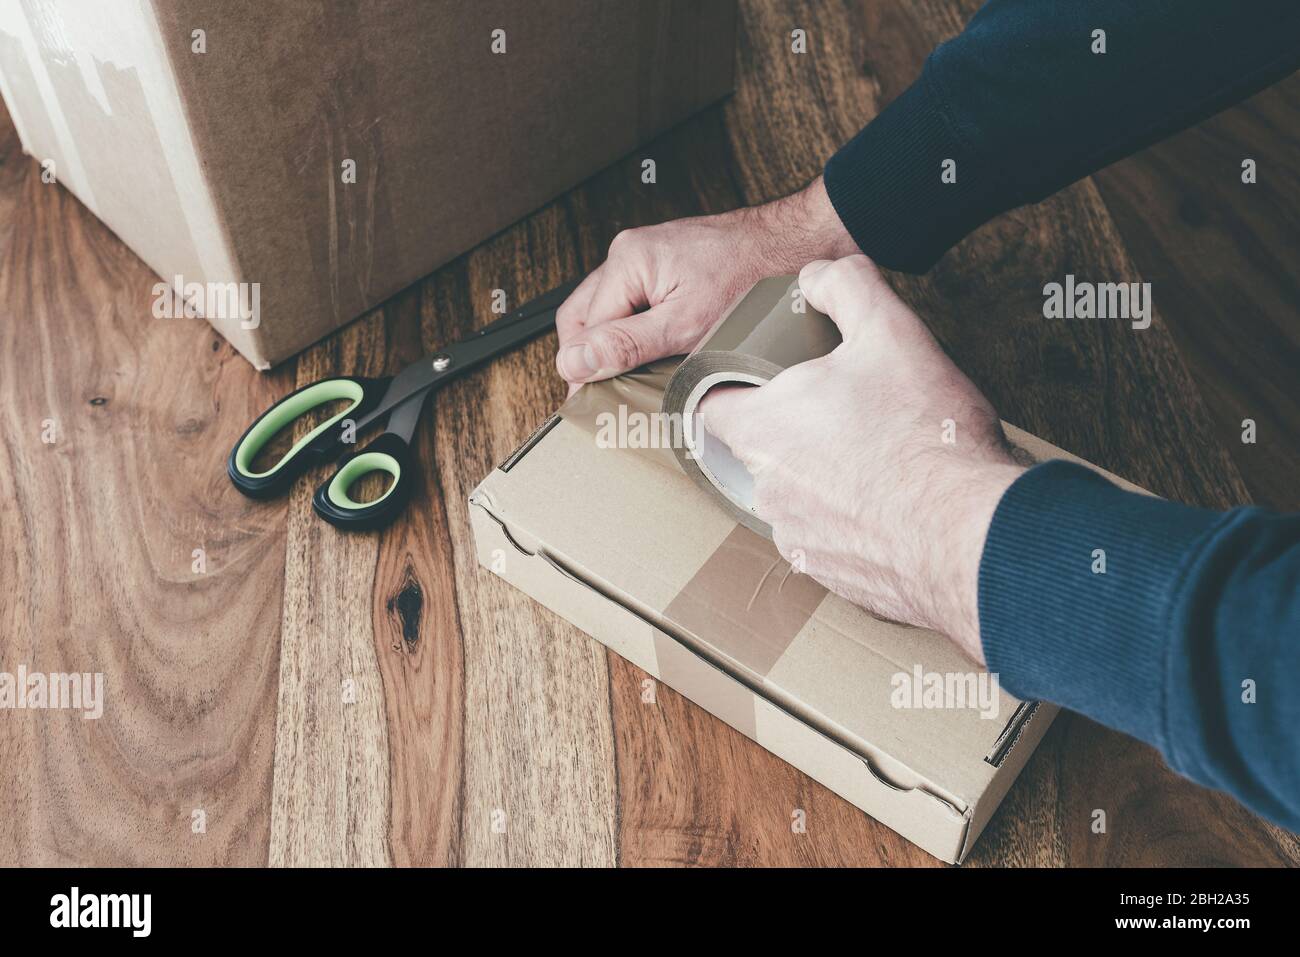 close-up of person sealing up shipping box with parcel tape, pruchase return and return of goods concept Stock Photo